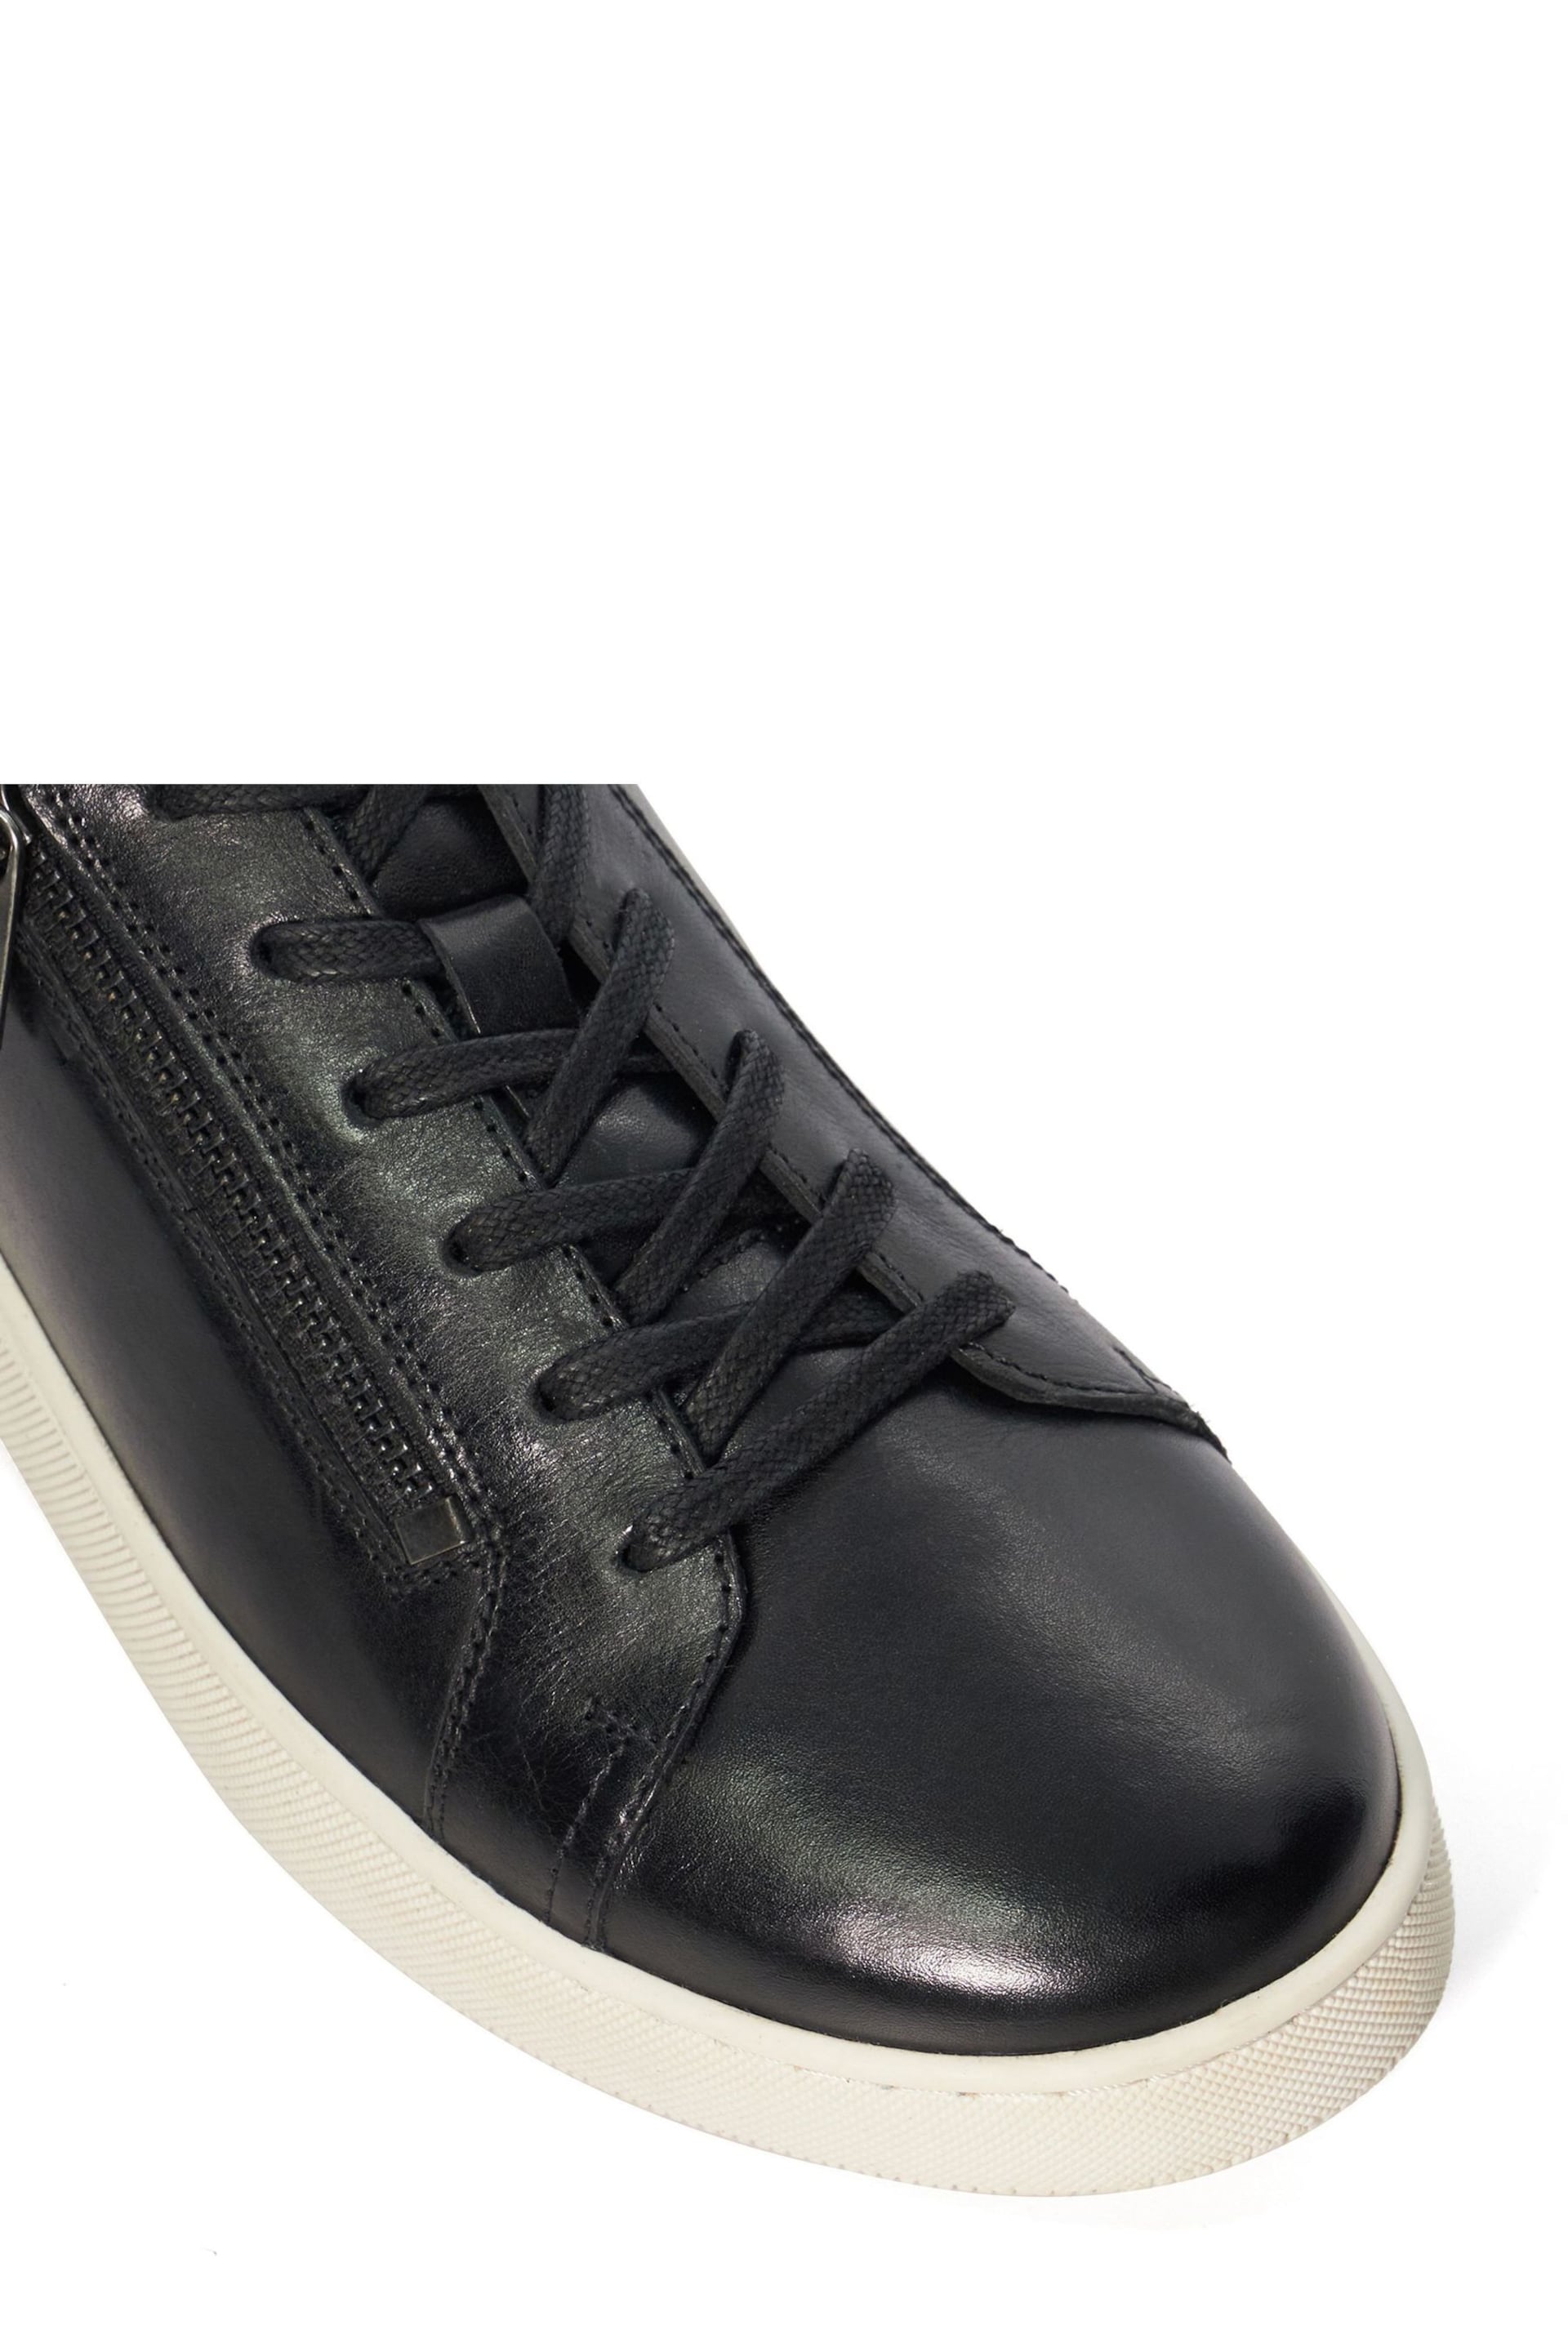 Dune London Black Tribute Zip Detail Cupsole Trainers - Image 6 of 6